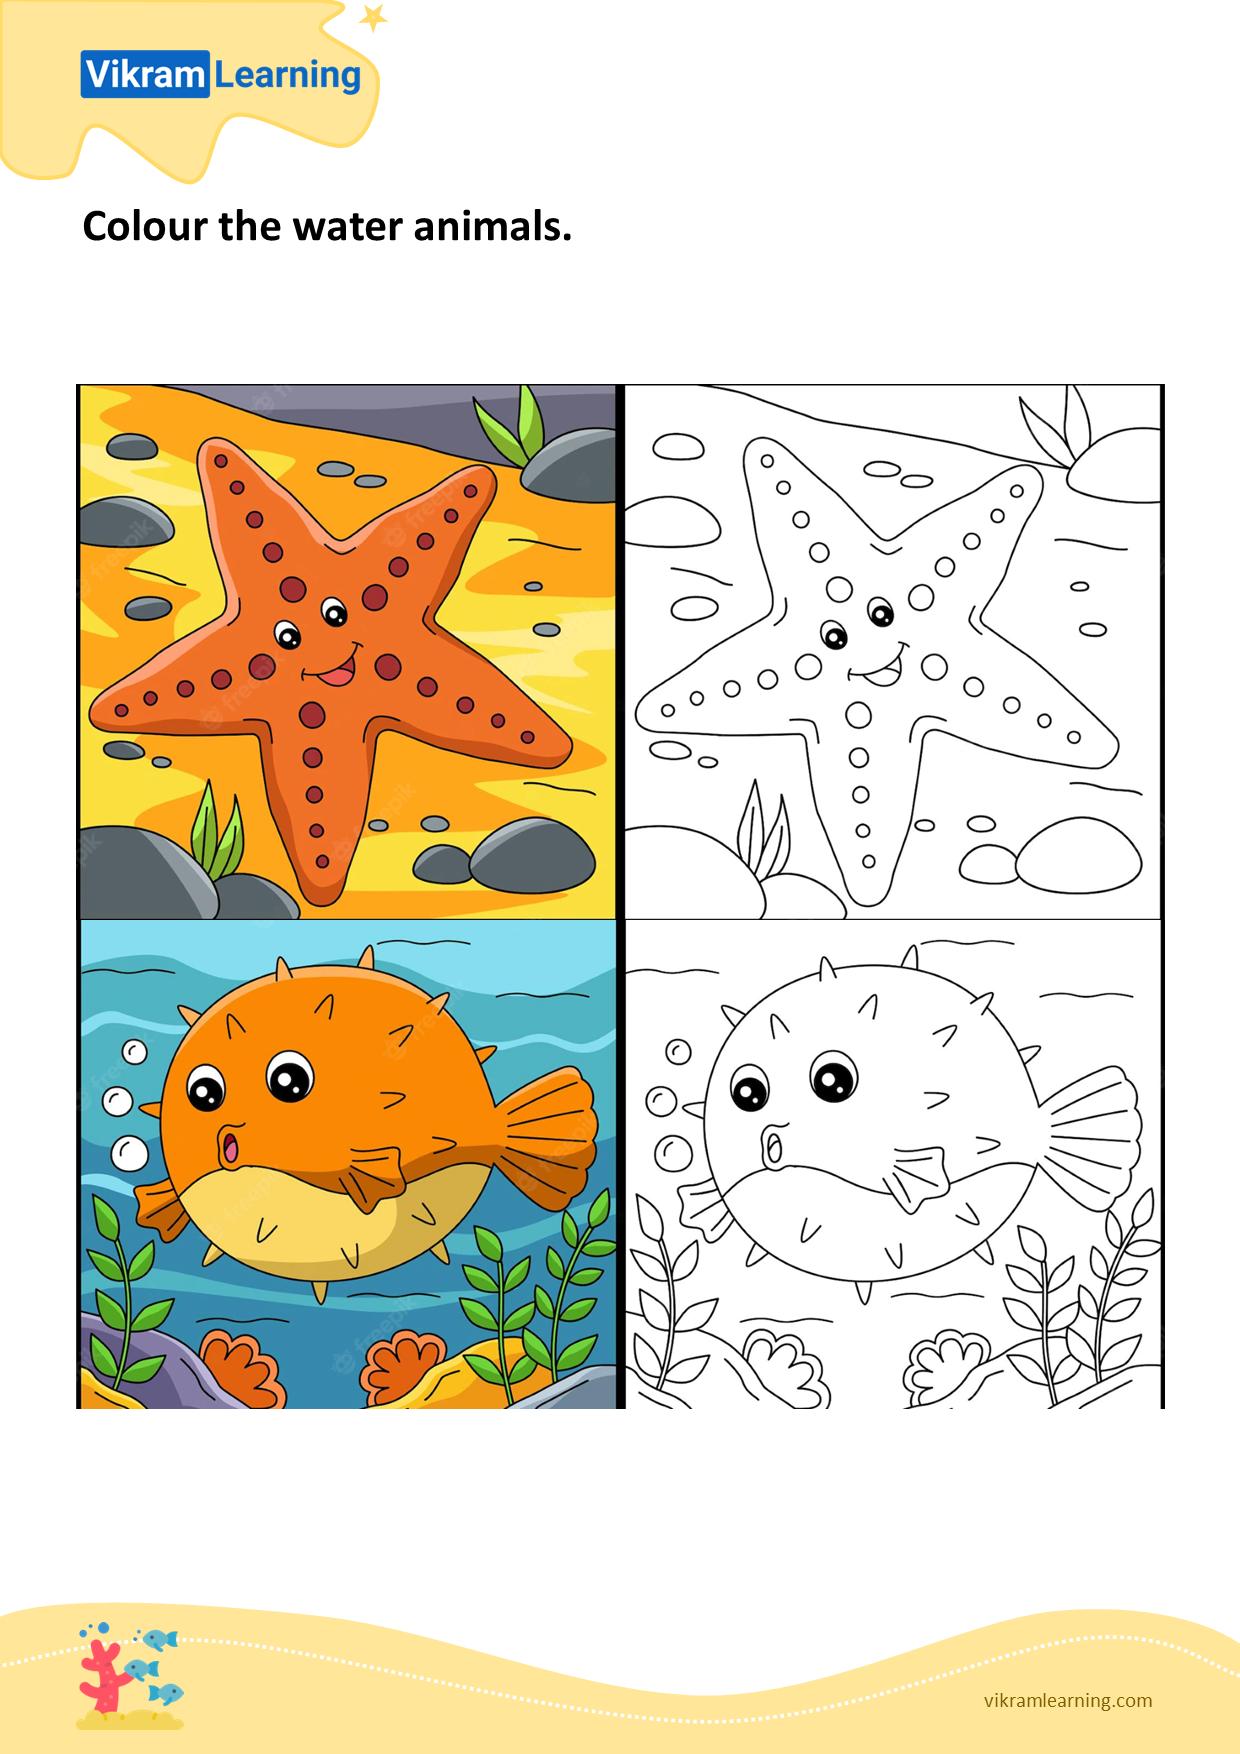 Download colour the water animals - 2 worksheets 